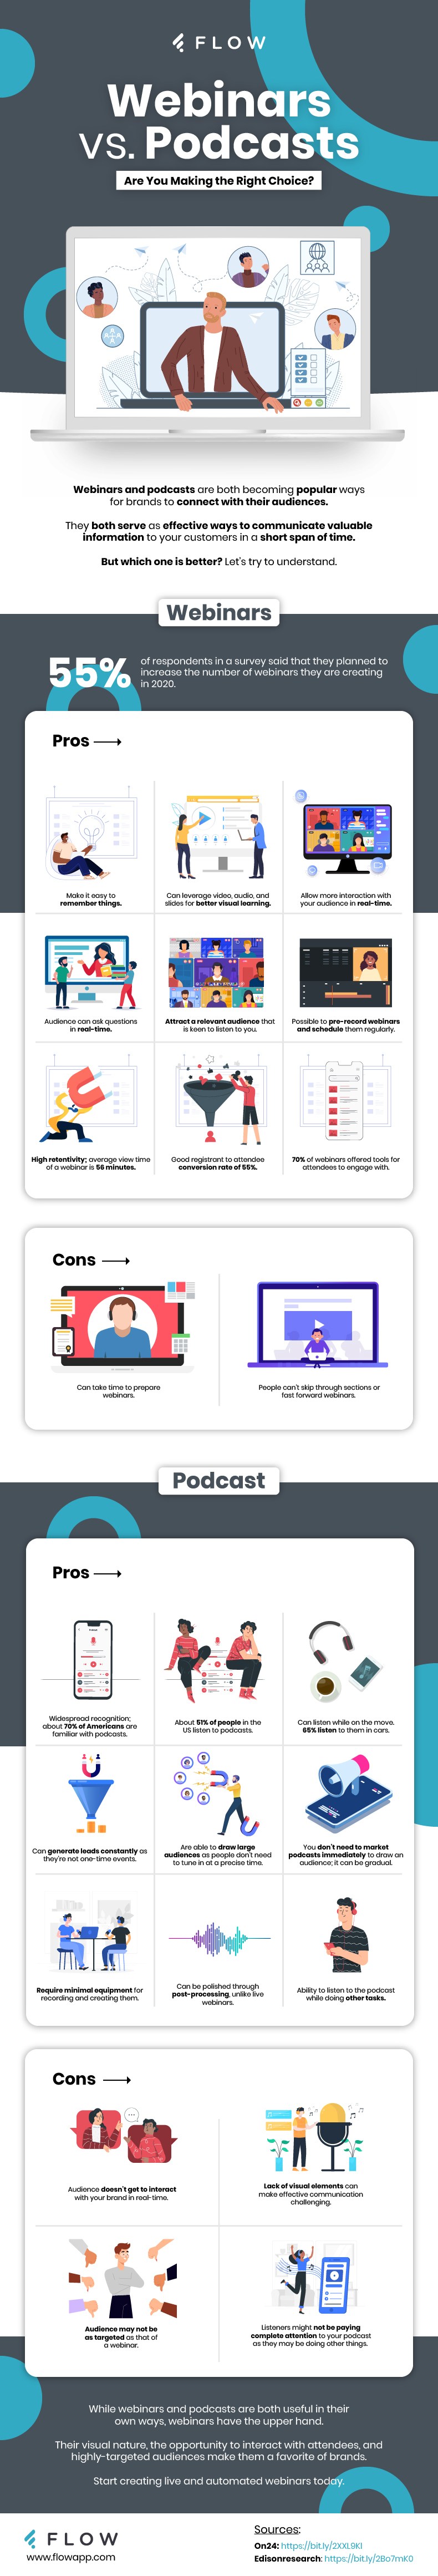 Infographic on the pros and cons of webinars and podcasts.